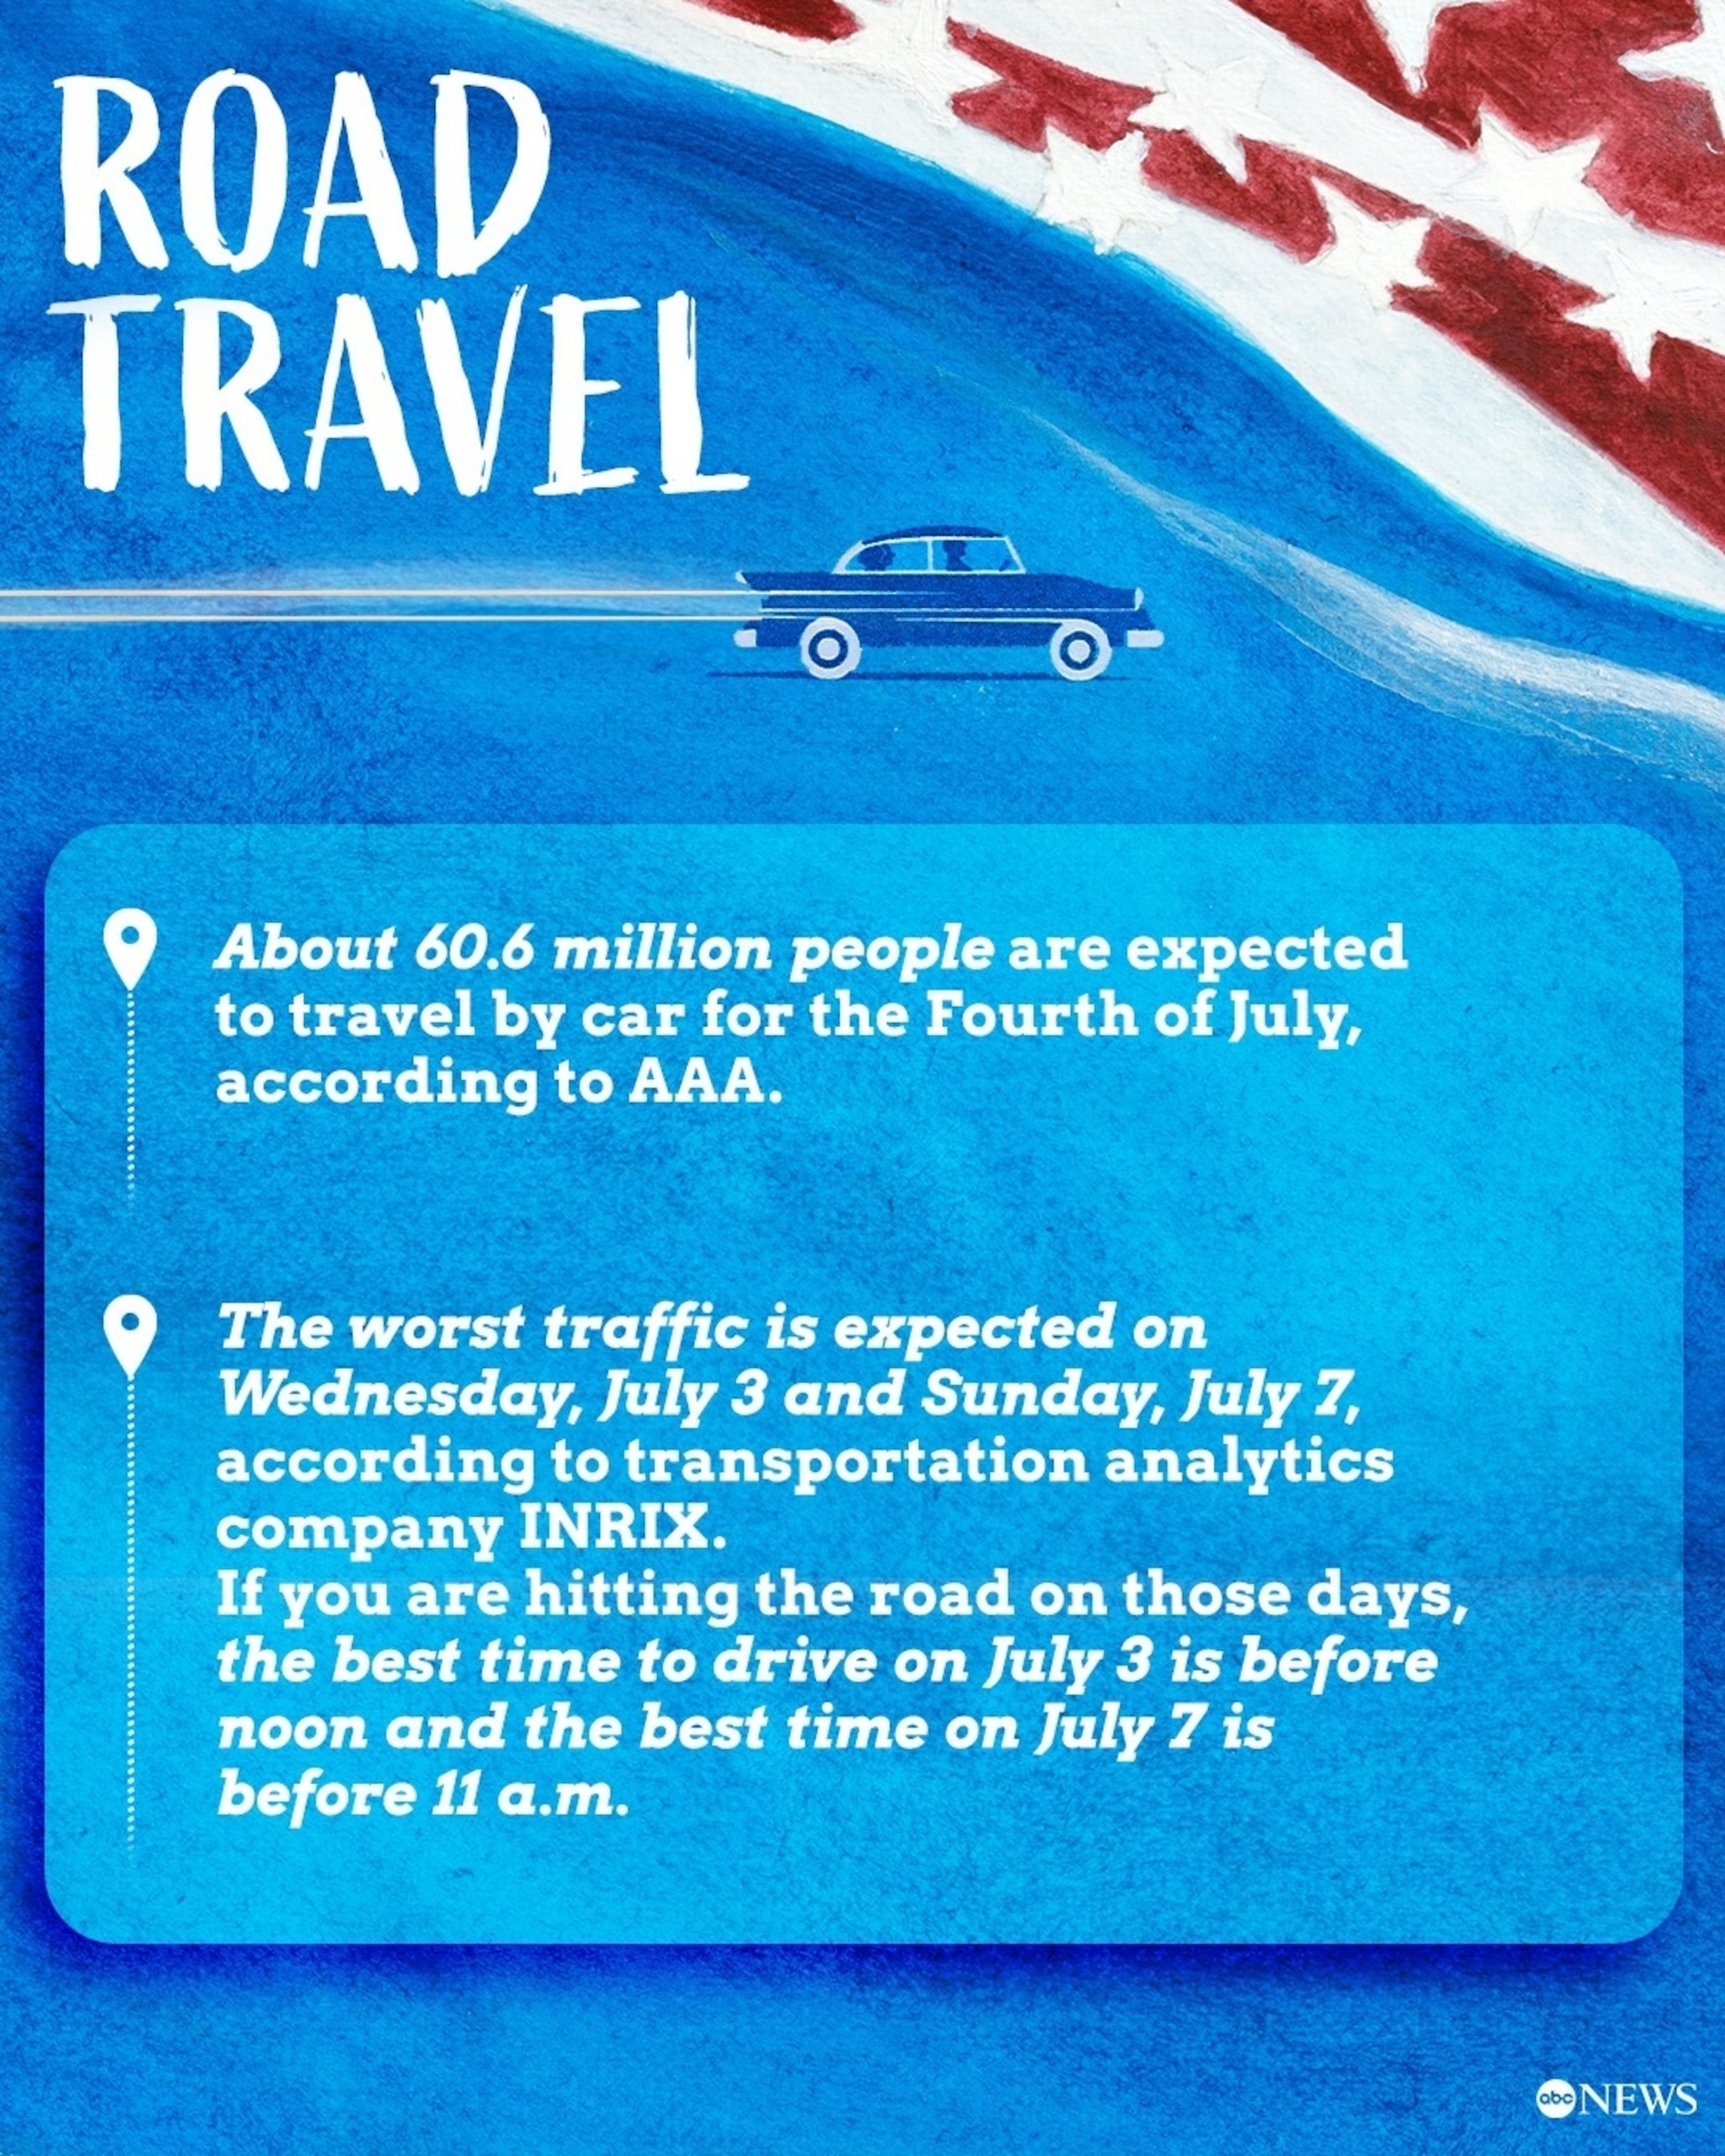 What to expect on the roads this Fourth of July.